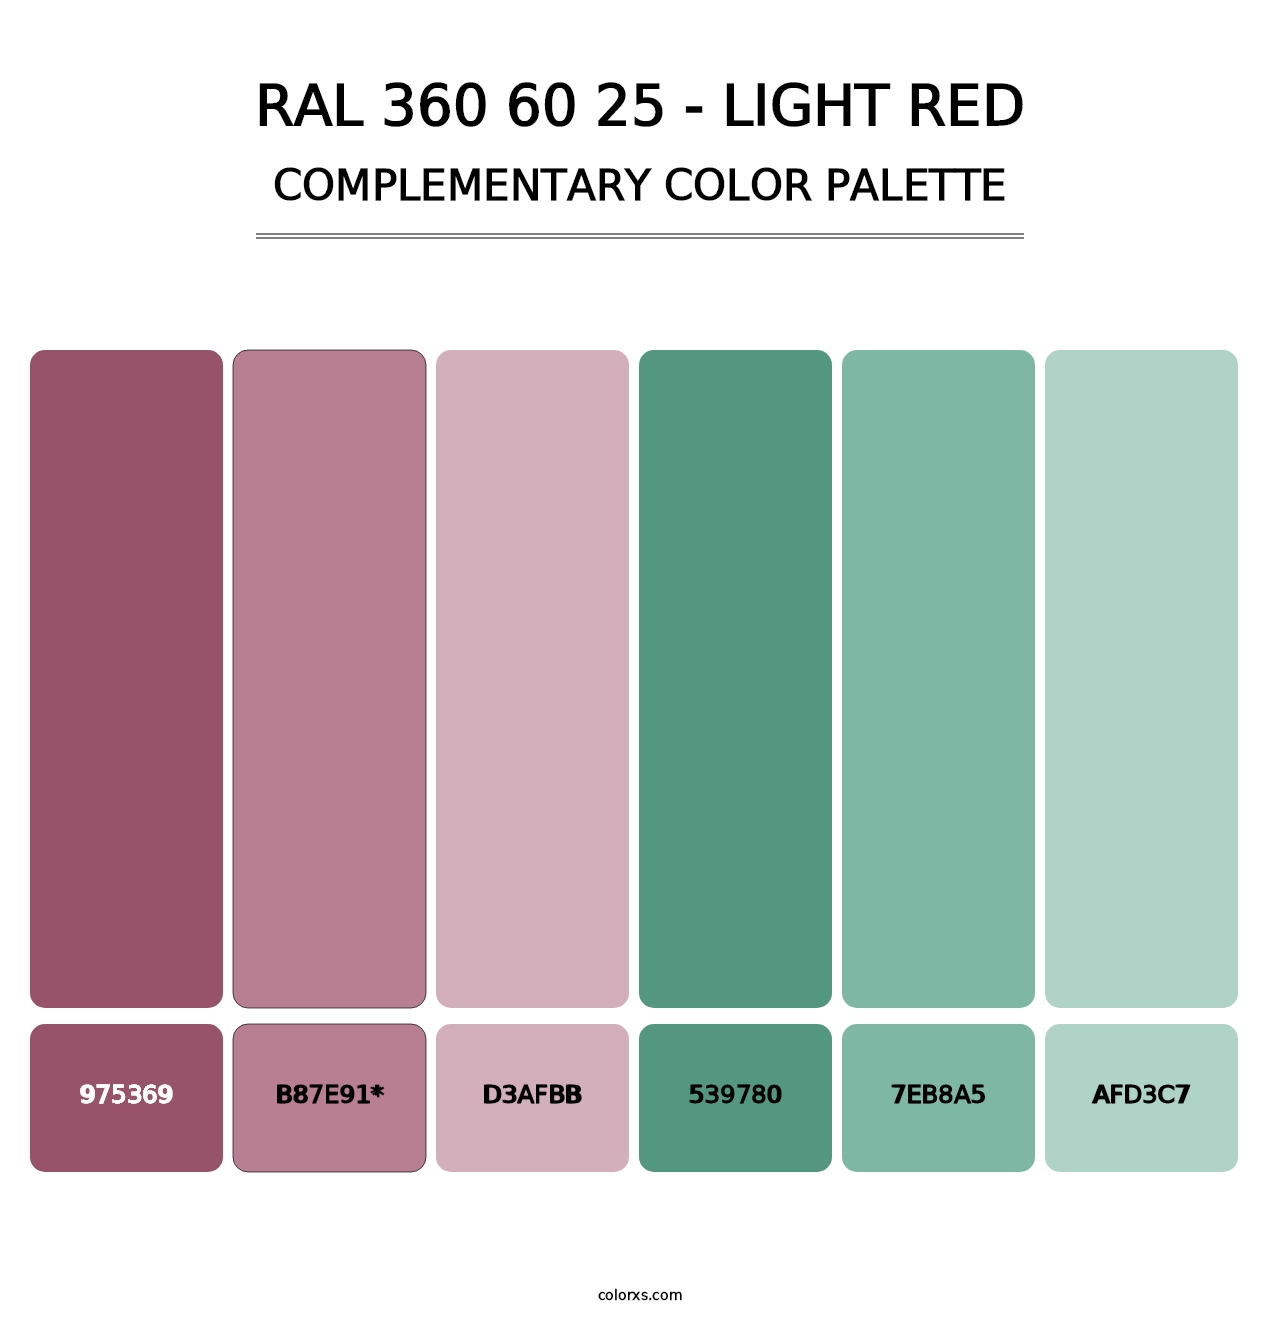 RAL 360 60 25 - Light Red - Complementary Color Palette